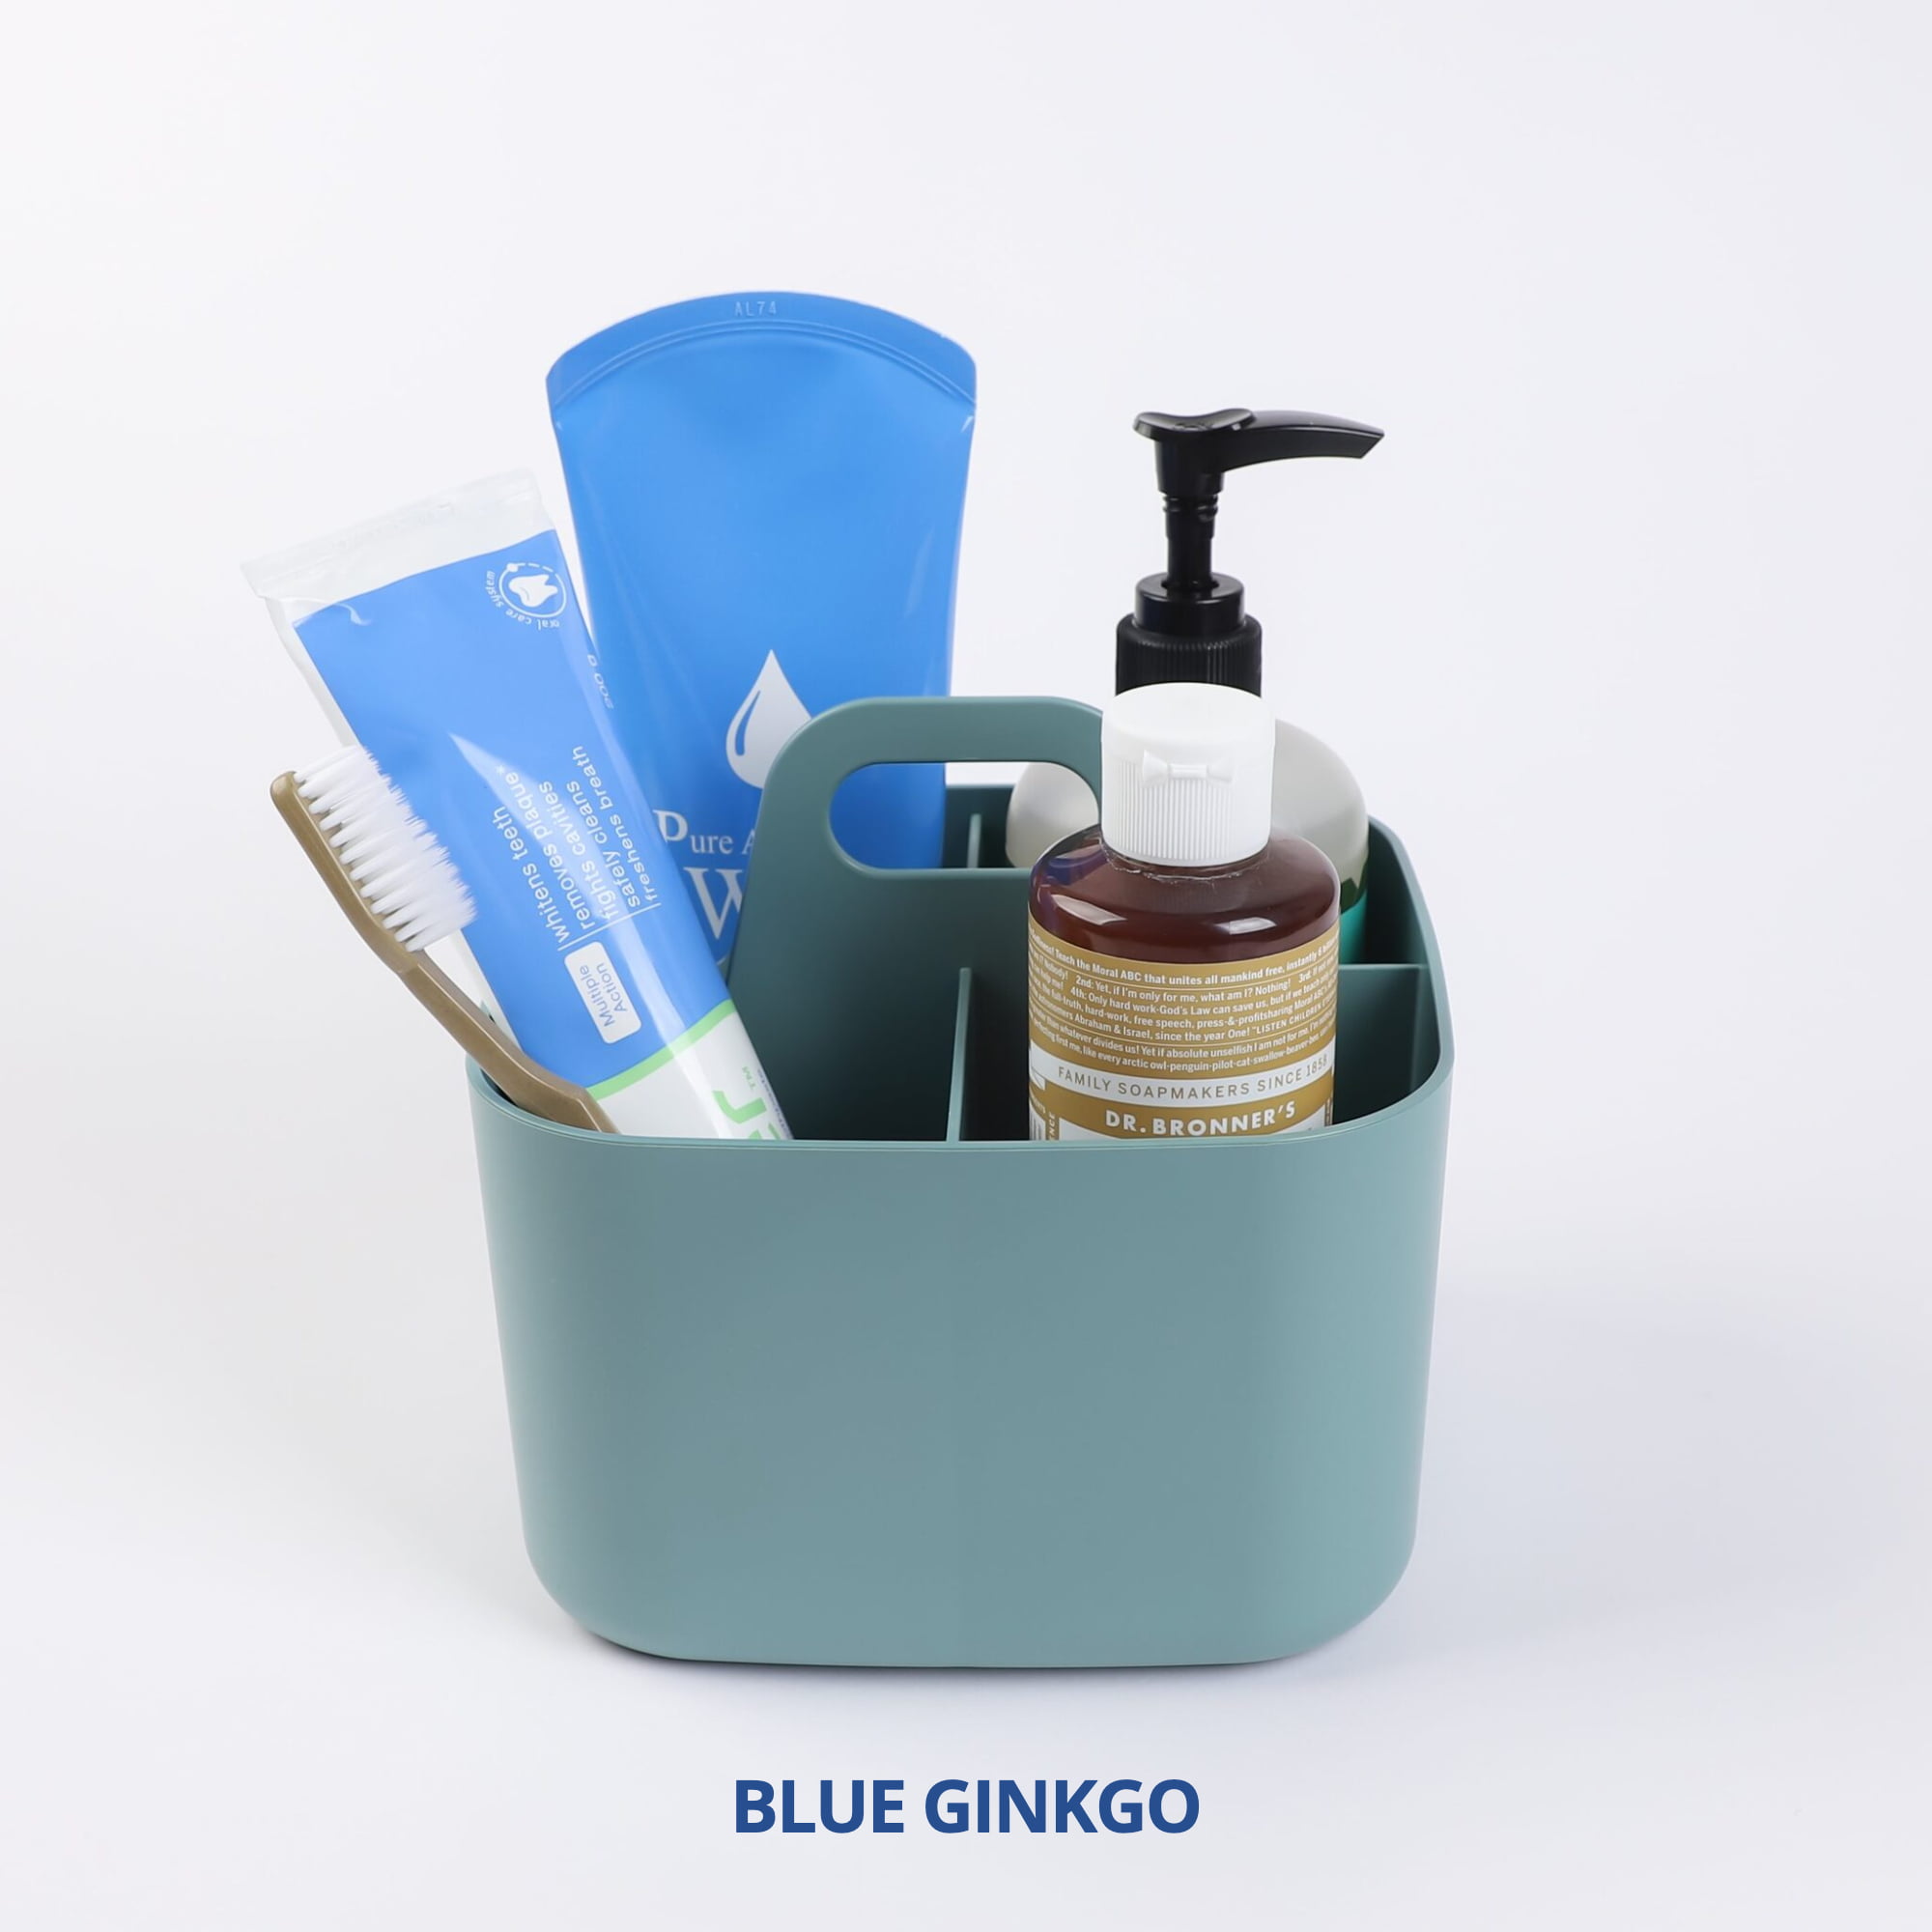 BLUE GINKGO Multipurpose Caddy Organizer - Stackable Plastic Caddy with  Handle | Desk, Makeup, Dorm Caddy, Classroom Art Organizers and Storage  Tote